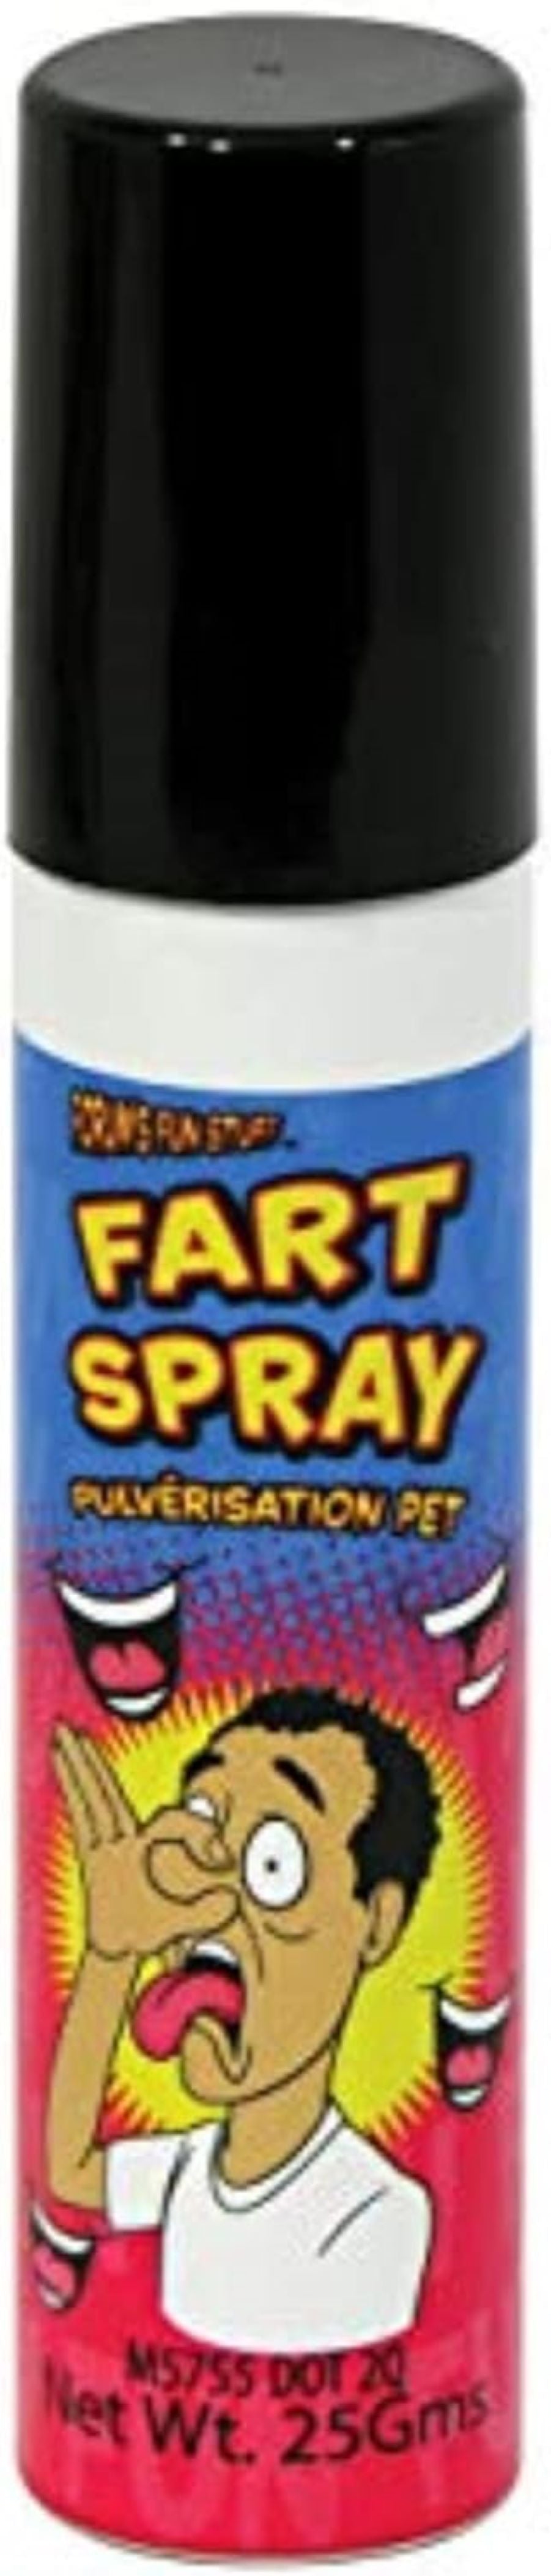 Fart Spray - Fool Your Friends By Letting Them Think Someone Let It Rip!